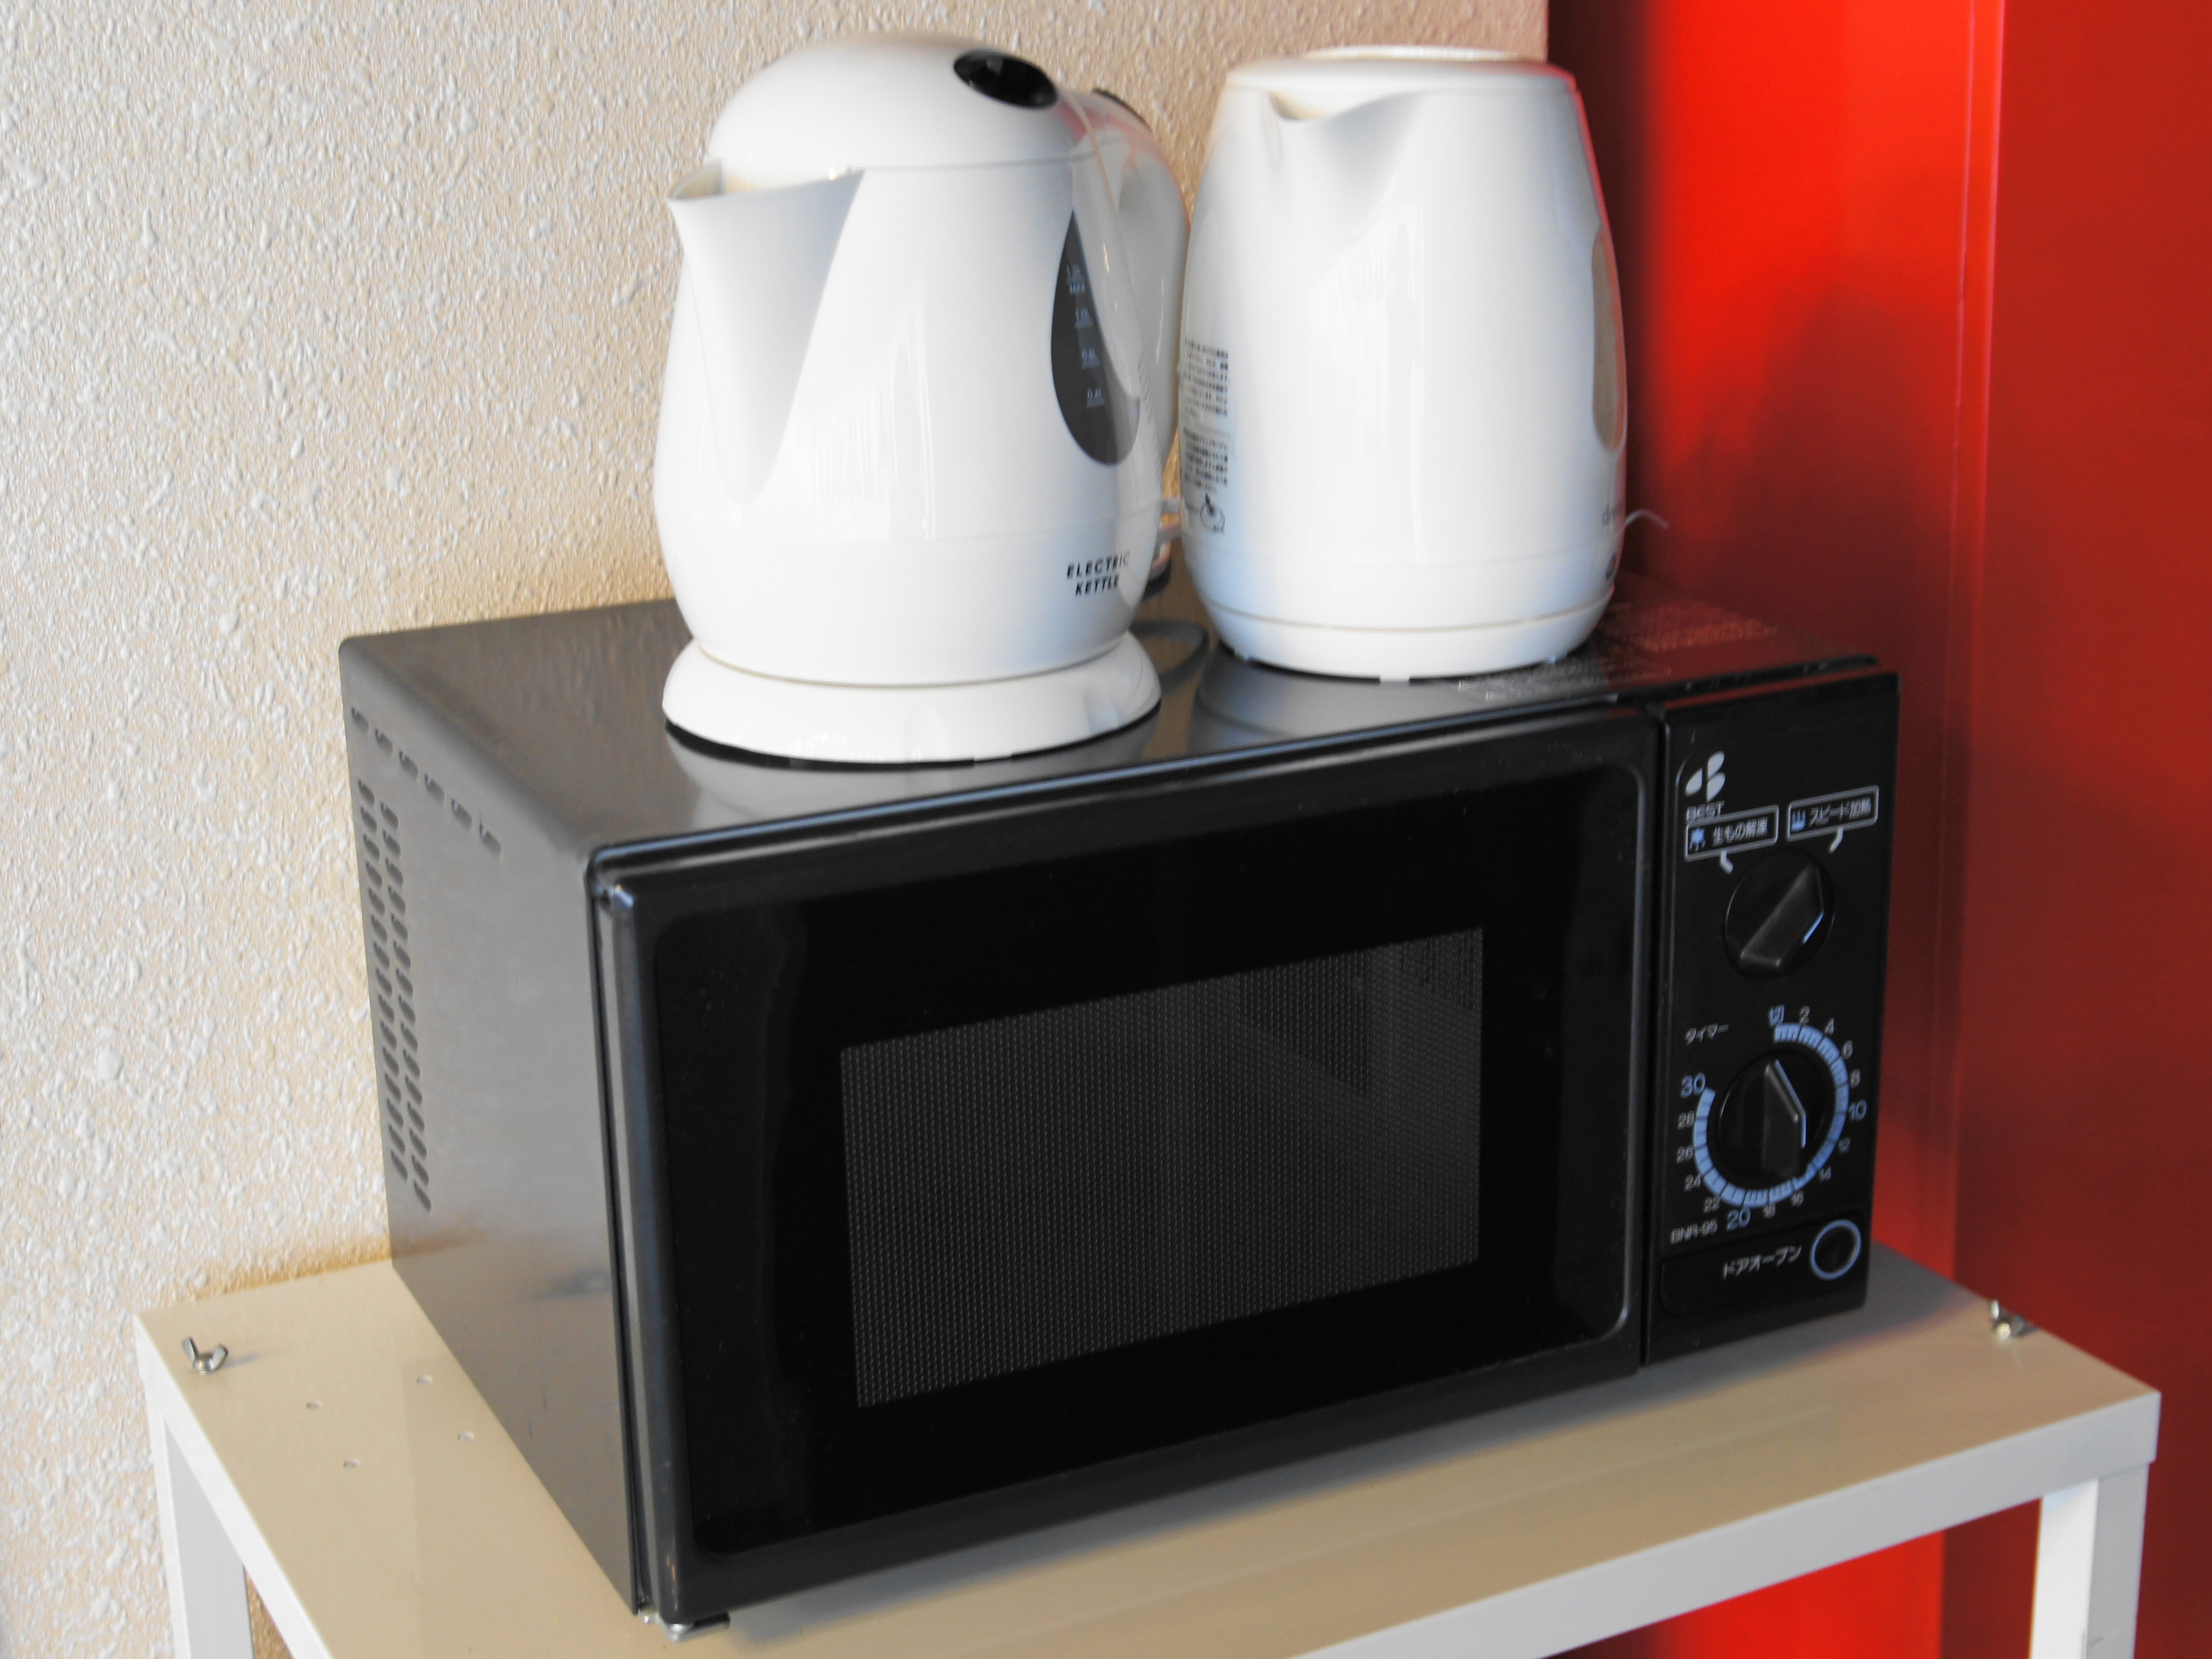 Microwave oven (shared), kettle for boiling water (rental)